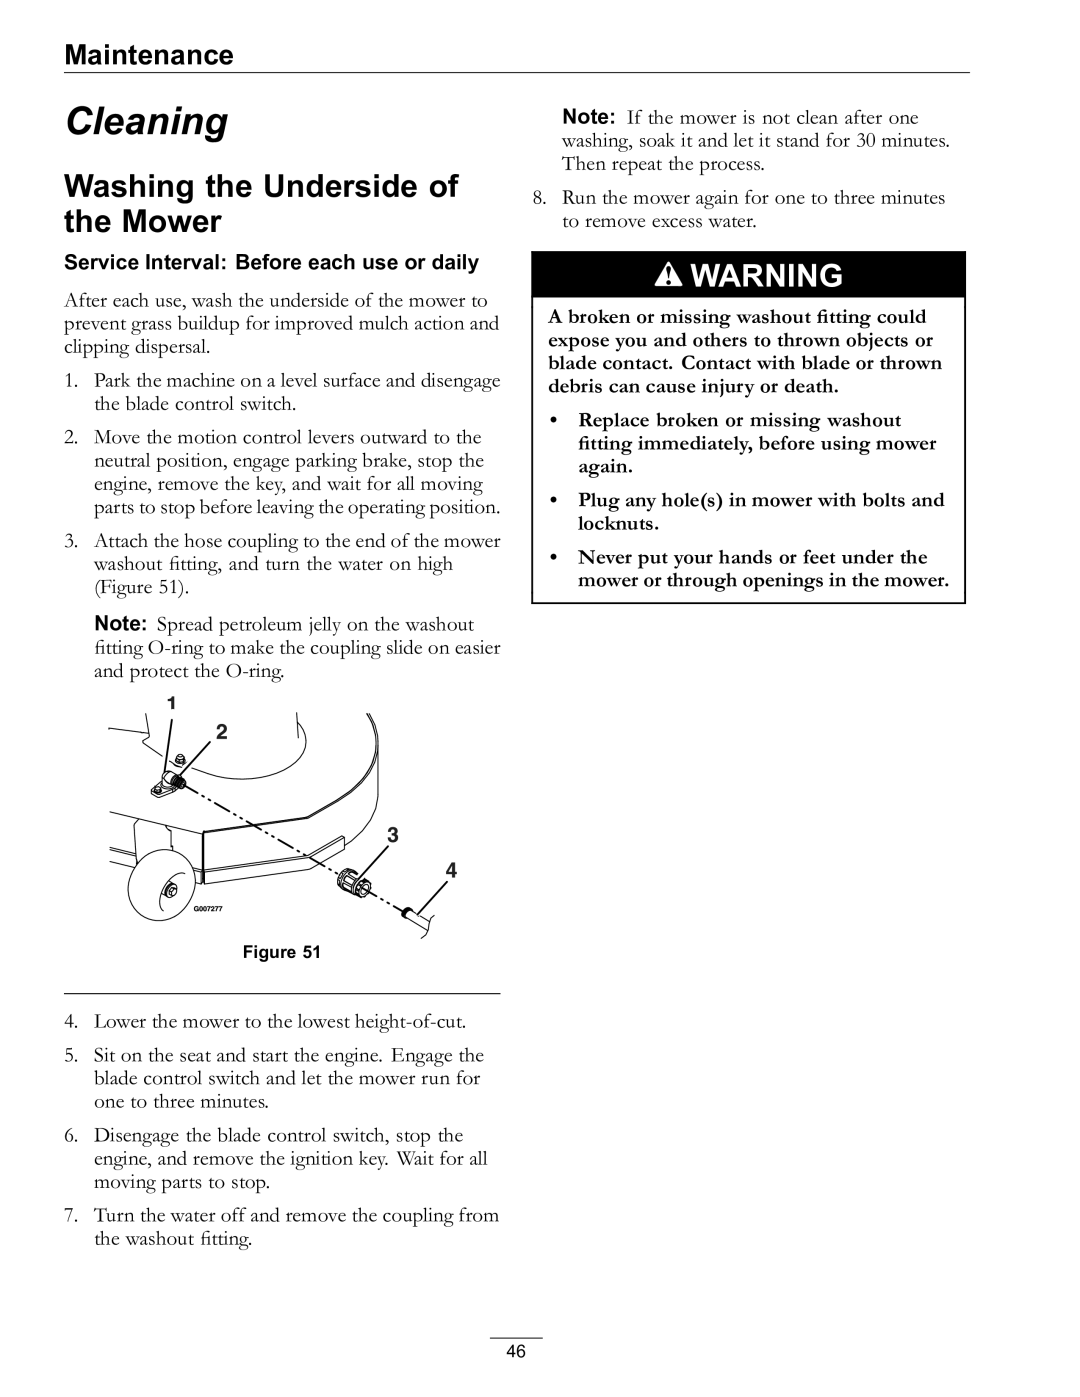 Exmark Lawn Mower manual Cleaning, Washing the Underside of the Mower 